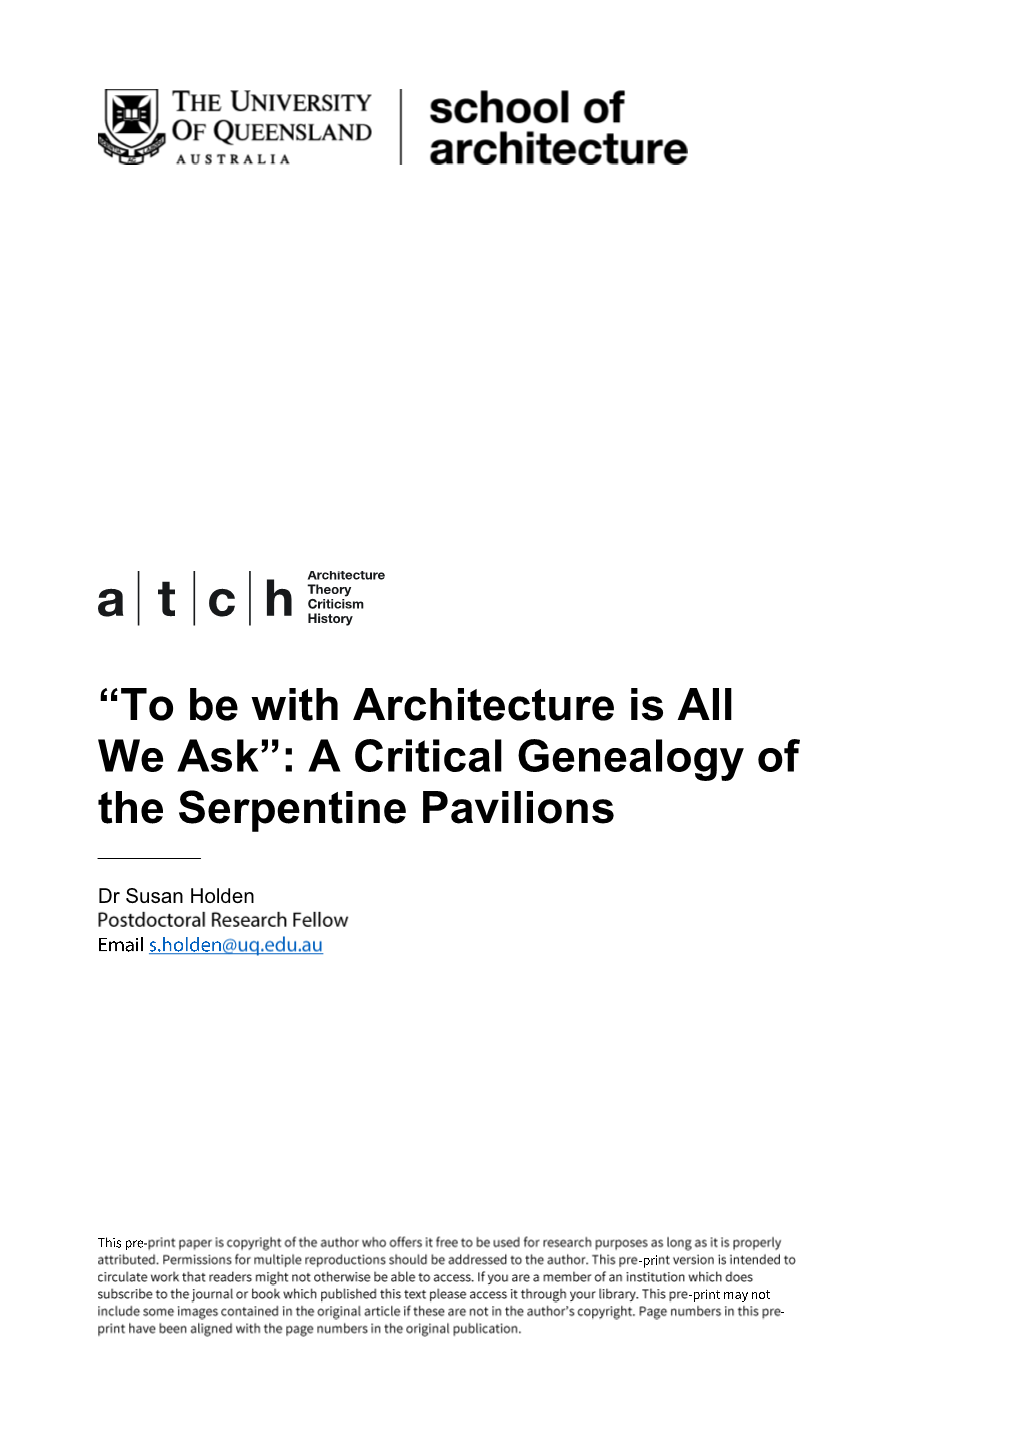 To Be with Architecture Is All We Ask”: a Critical Genealogy of the Serpentine Pavilions